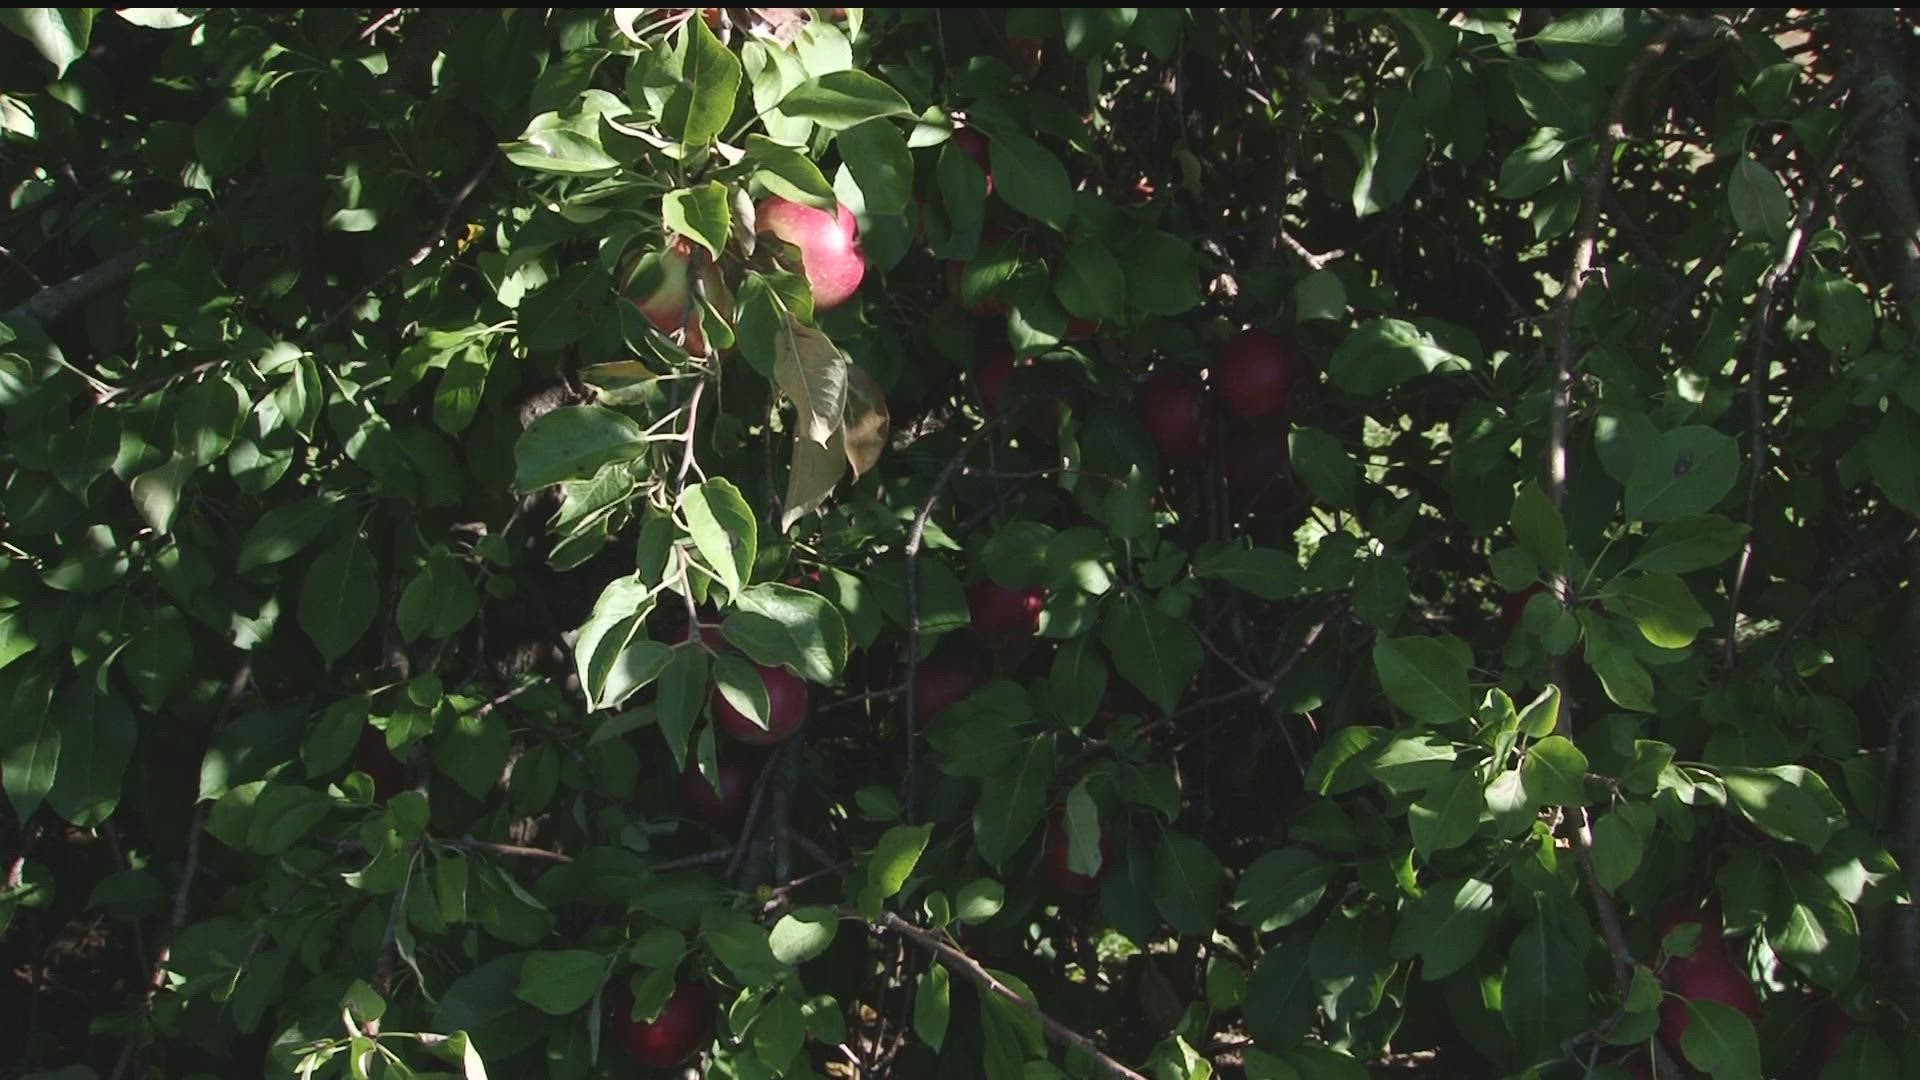 'Tis the season for a crisp, ripe apple. But what goes into growing the perfect fall fruit?